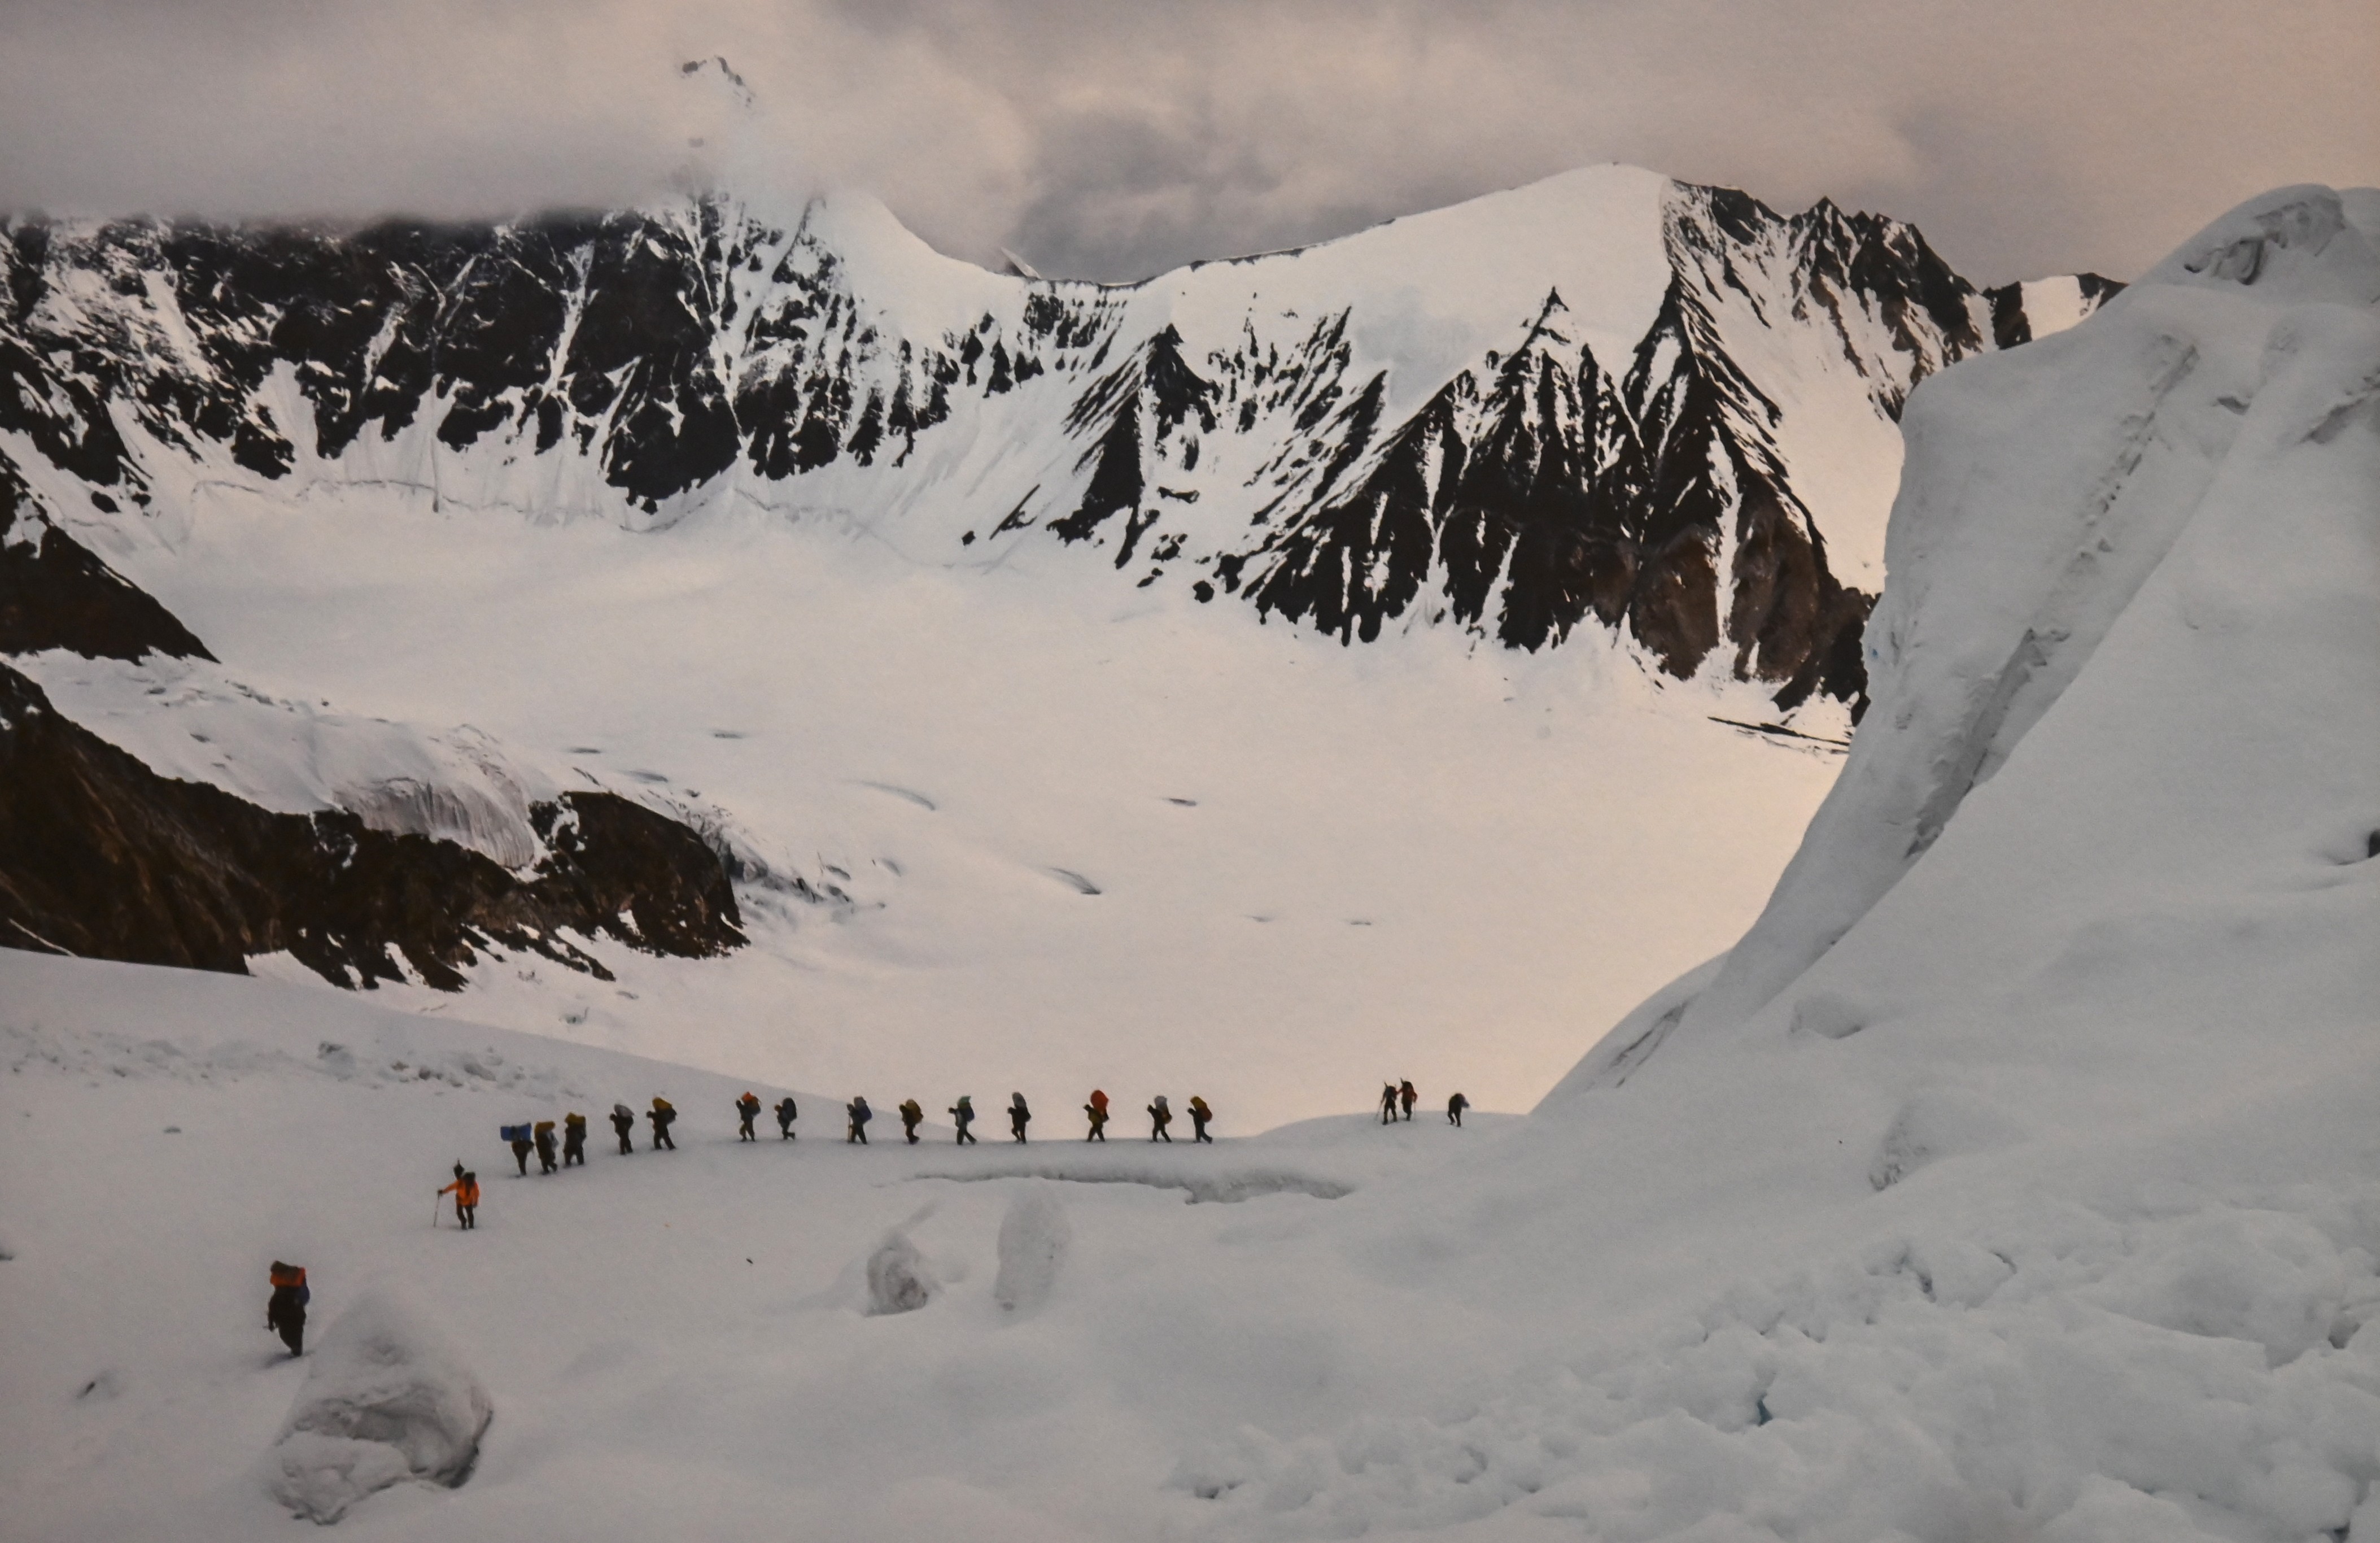 The climbers passing by the snow covered mountain